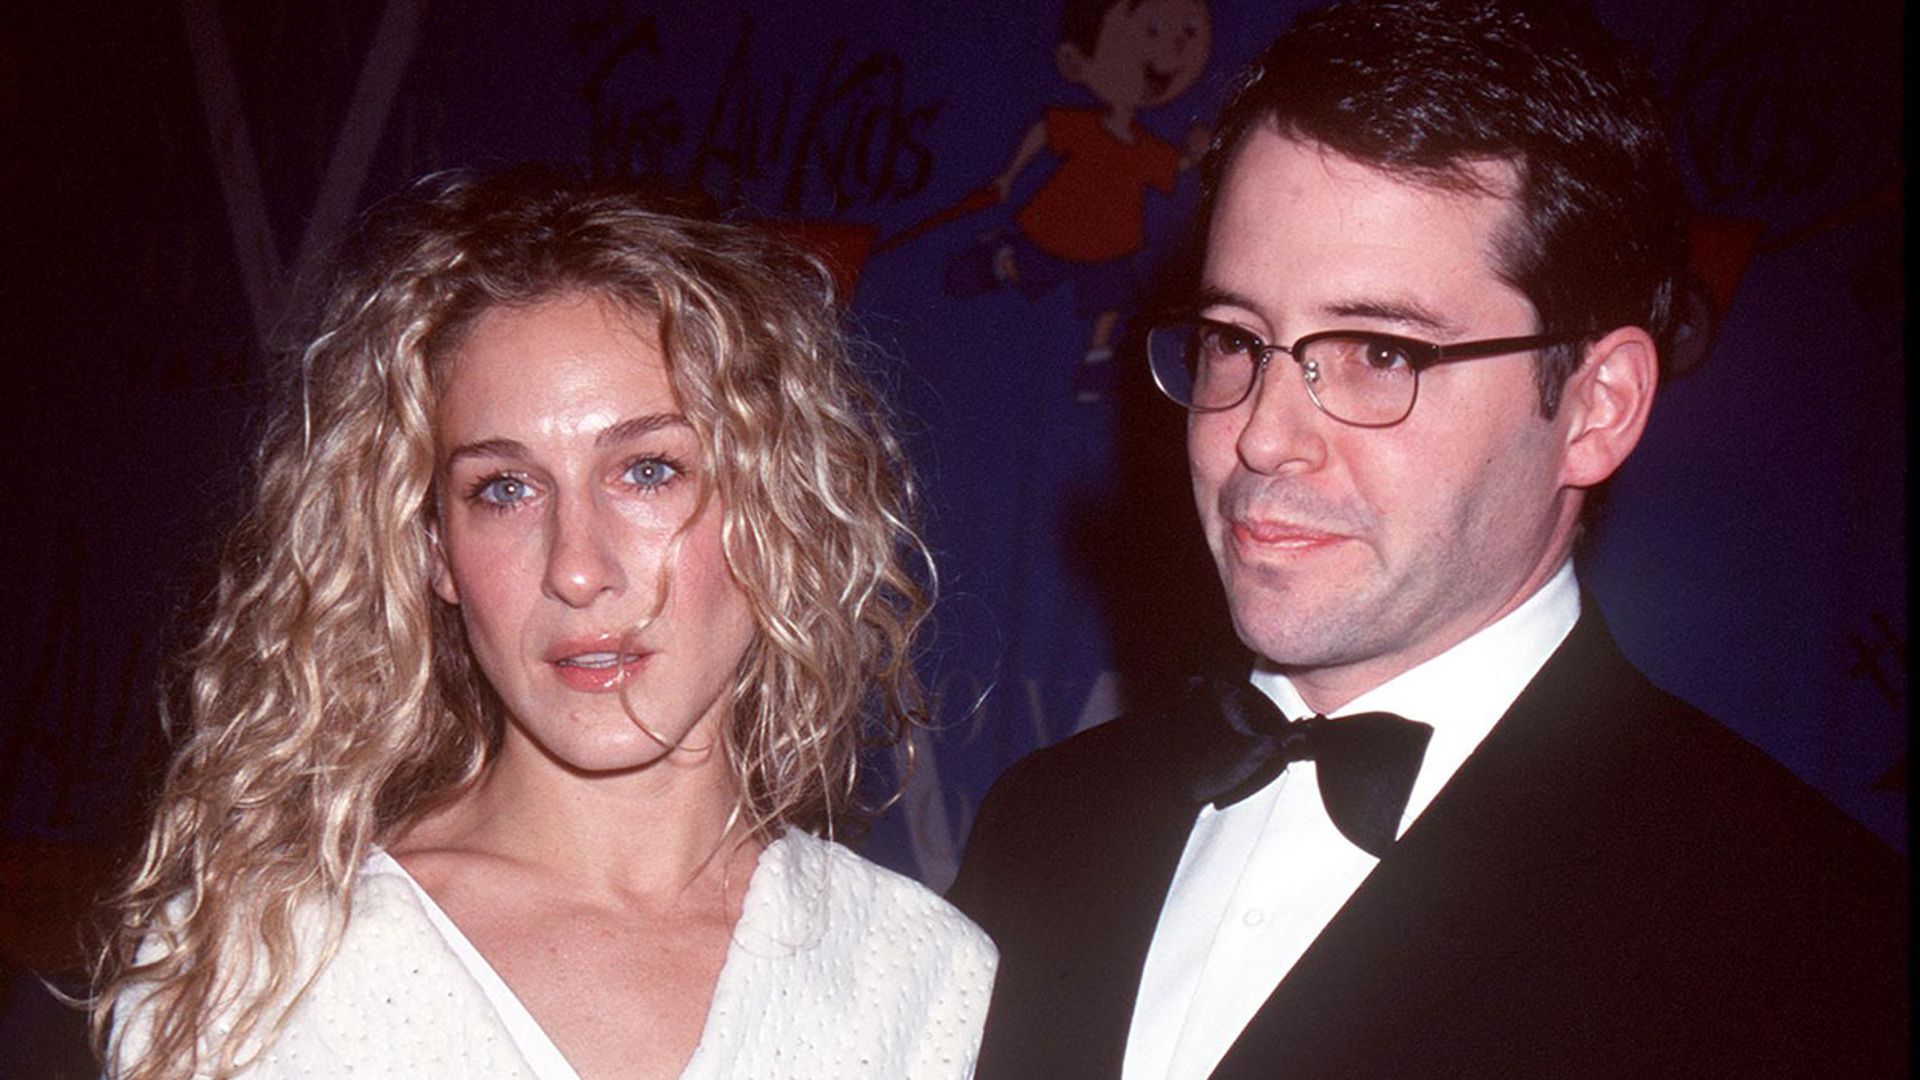 Sarah Jessica Parker shares never-before-seen wedding memento on special anniversary